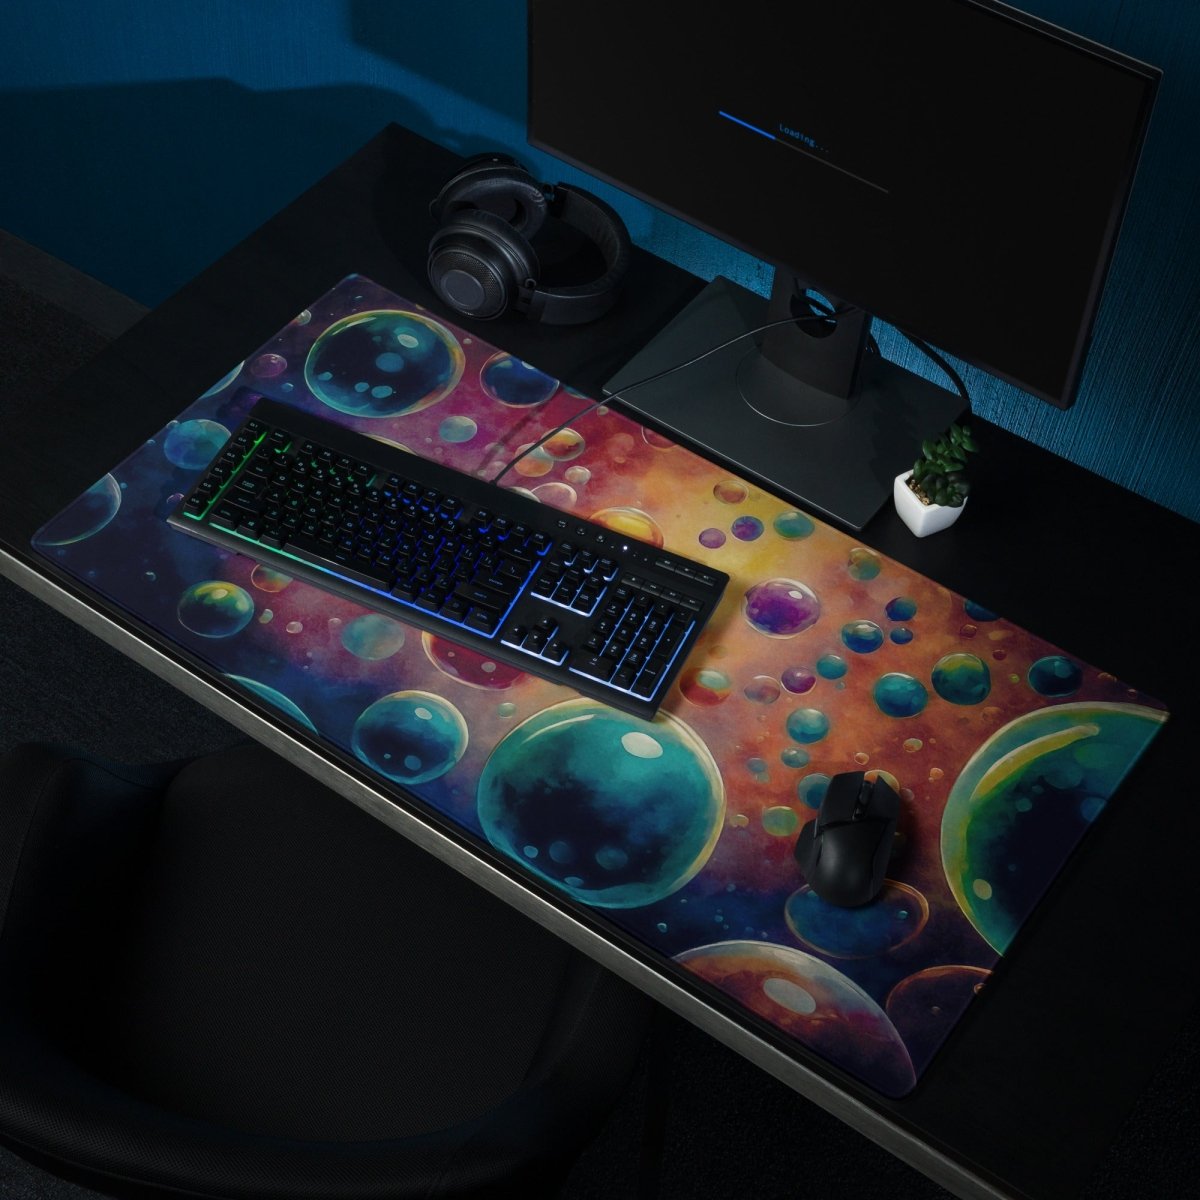 Galactic pop - Gaming mouse pad - Ever colorful